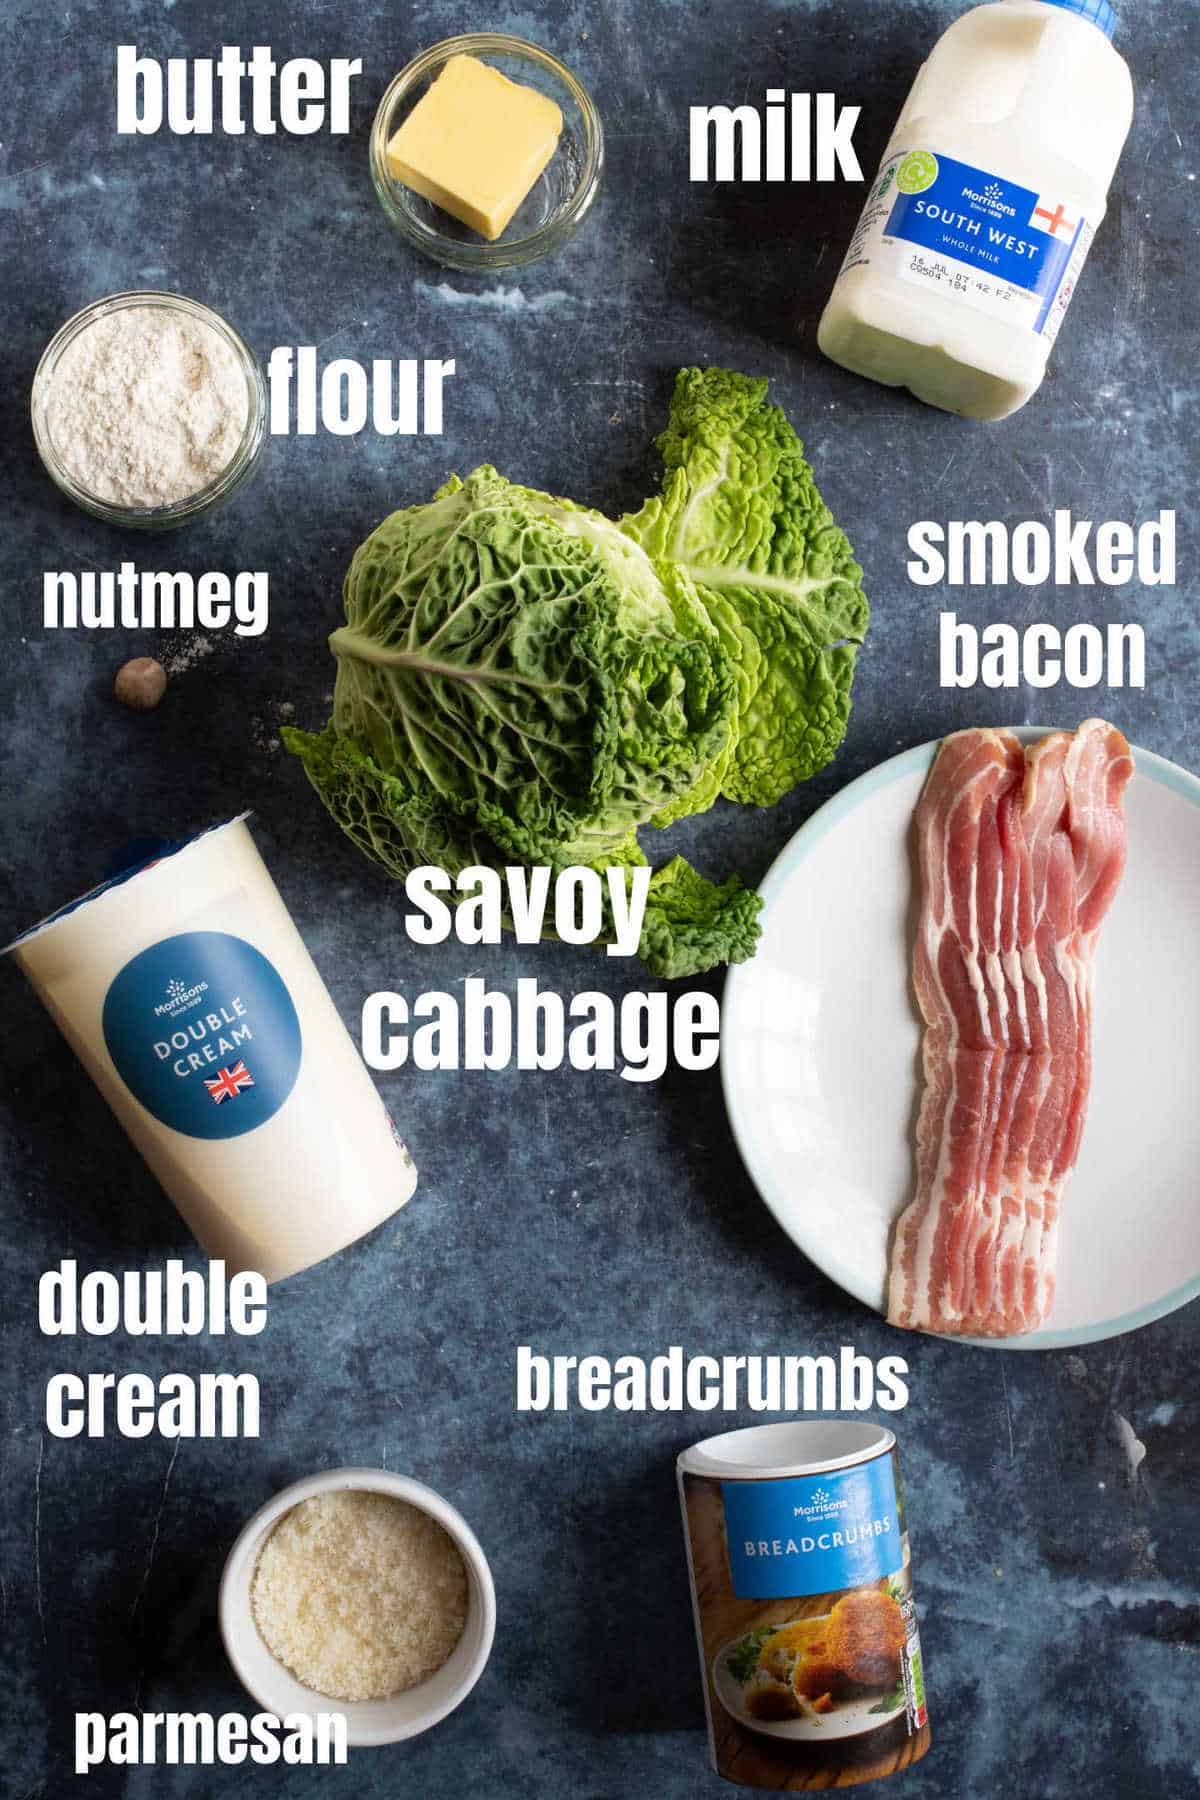 Ingredients for creamed cabbage.